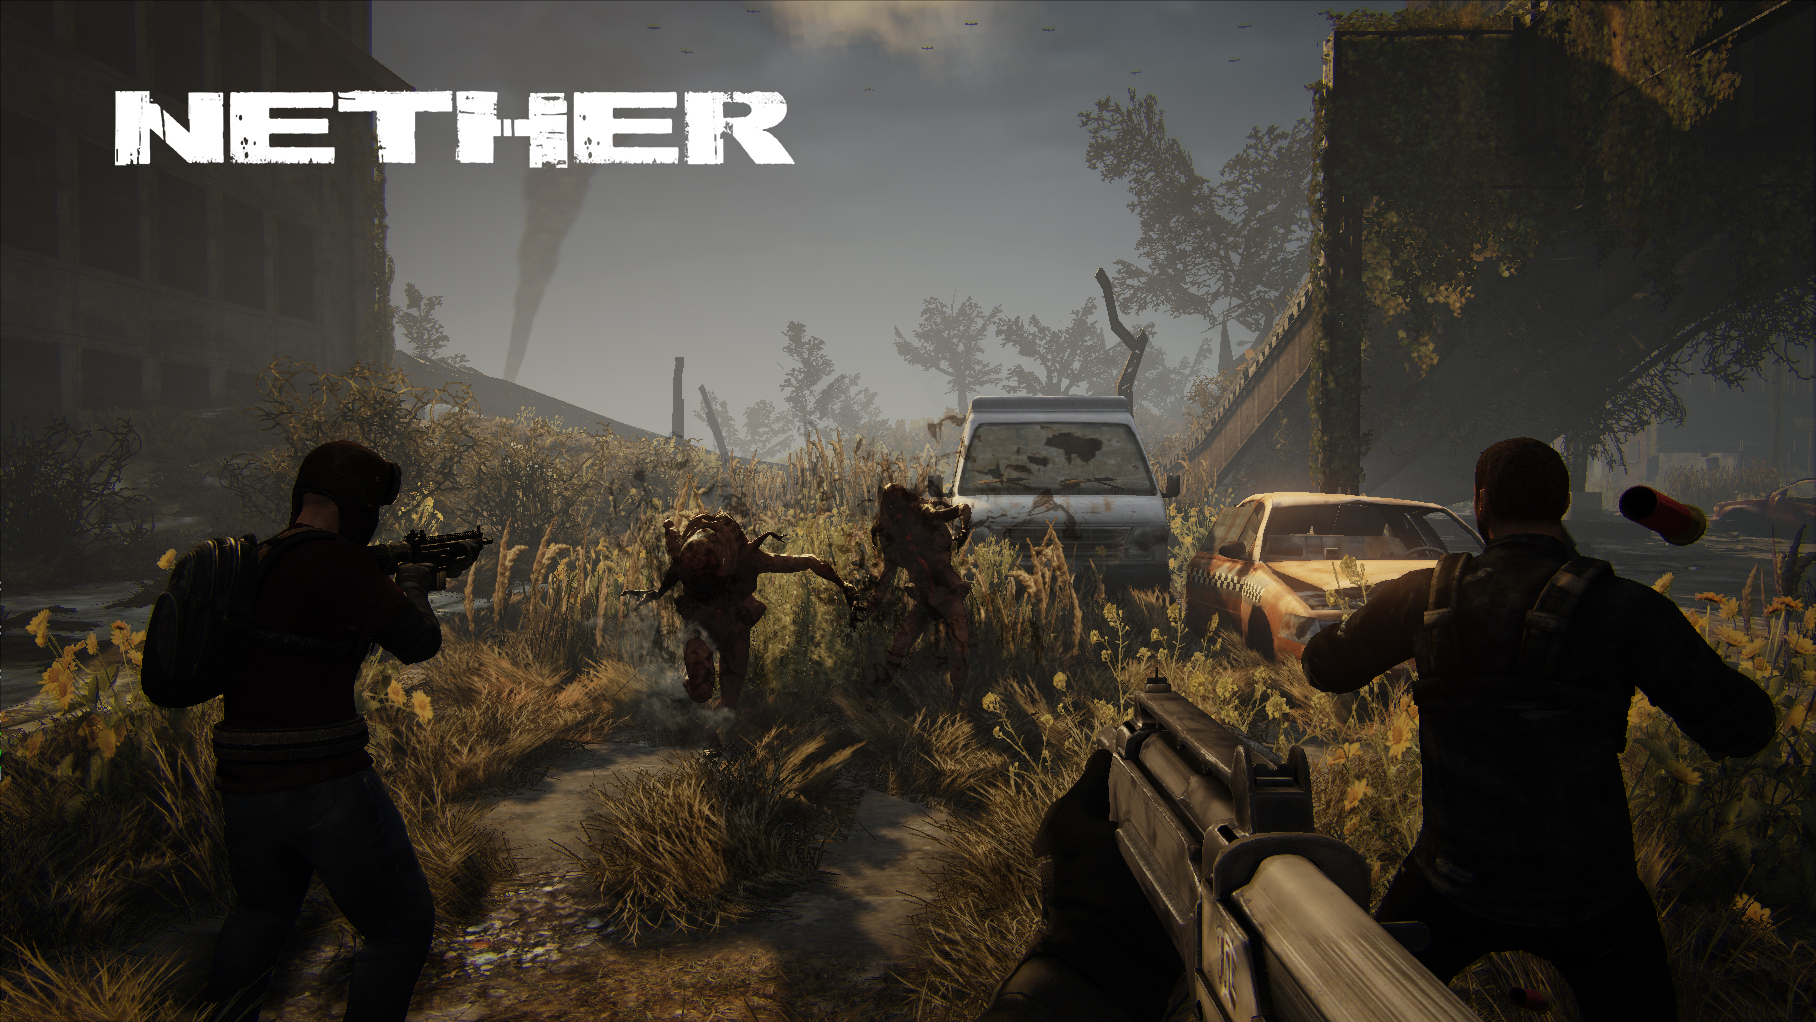 Pre-orders and Early Access Announced for Urban Survival Game Nether